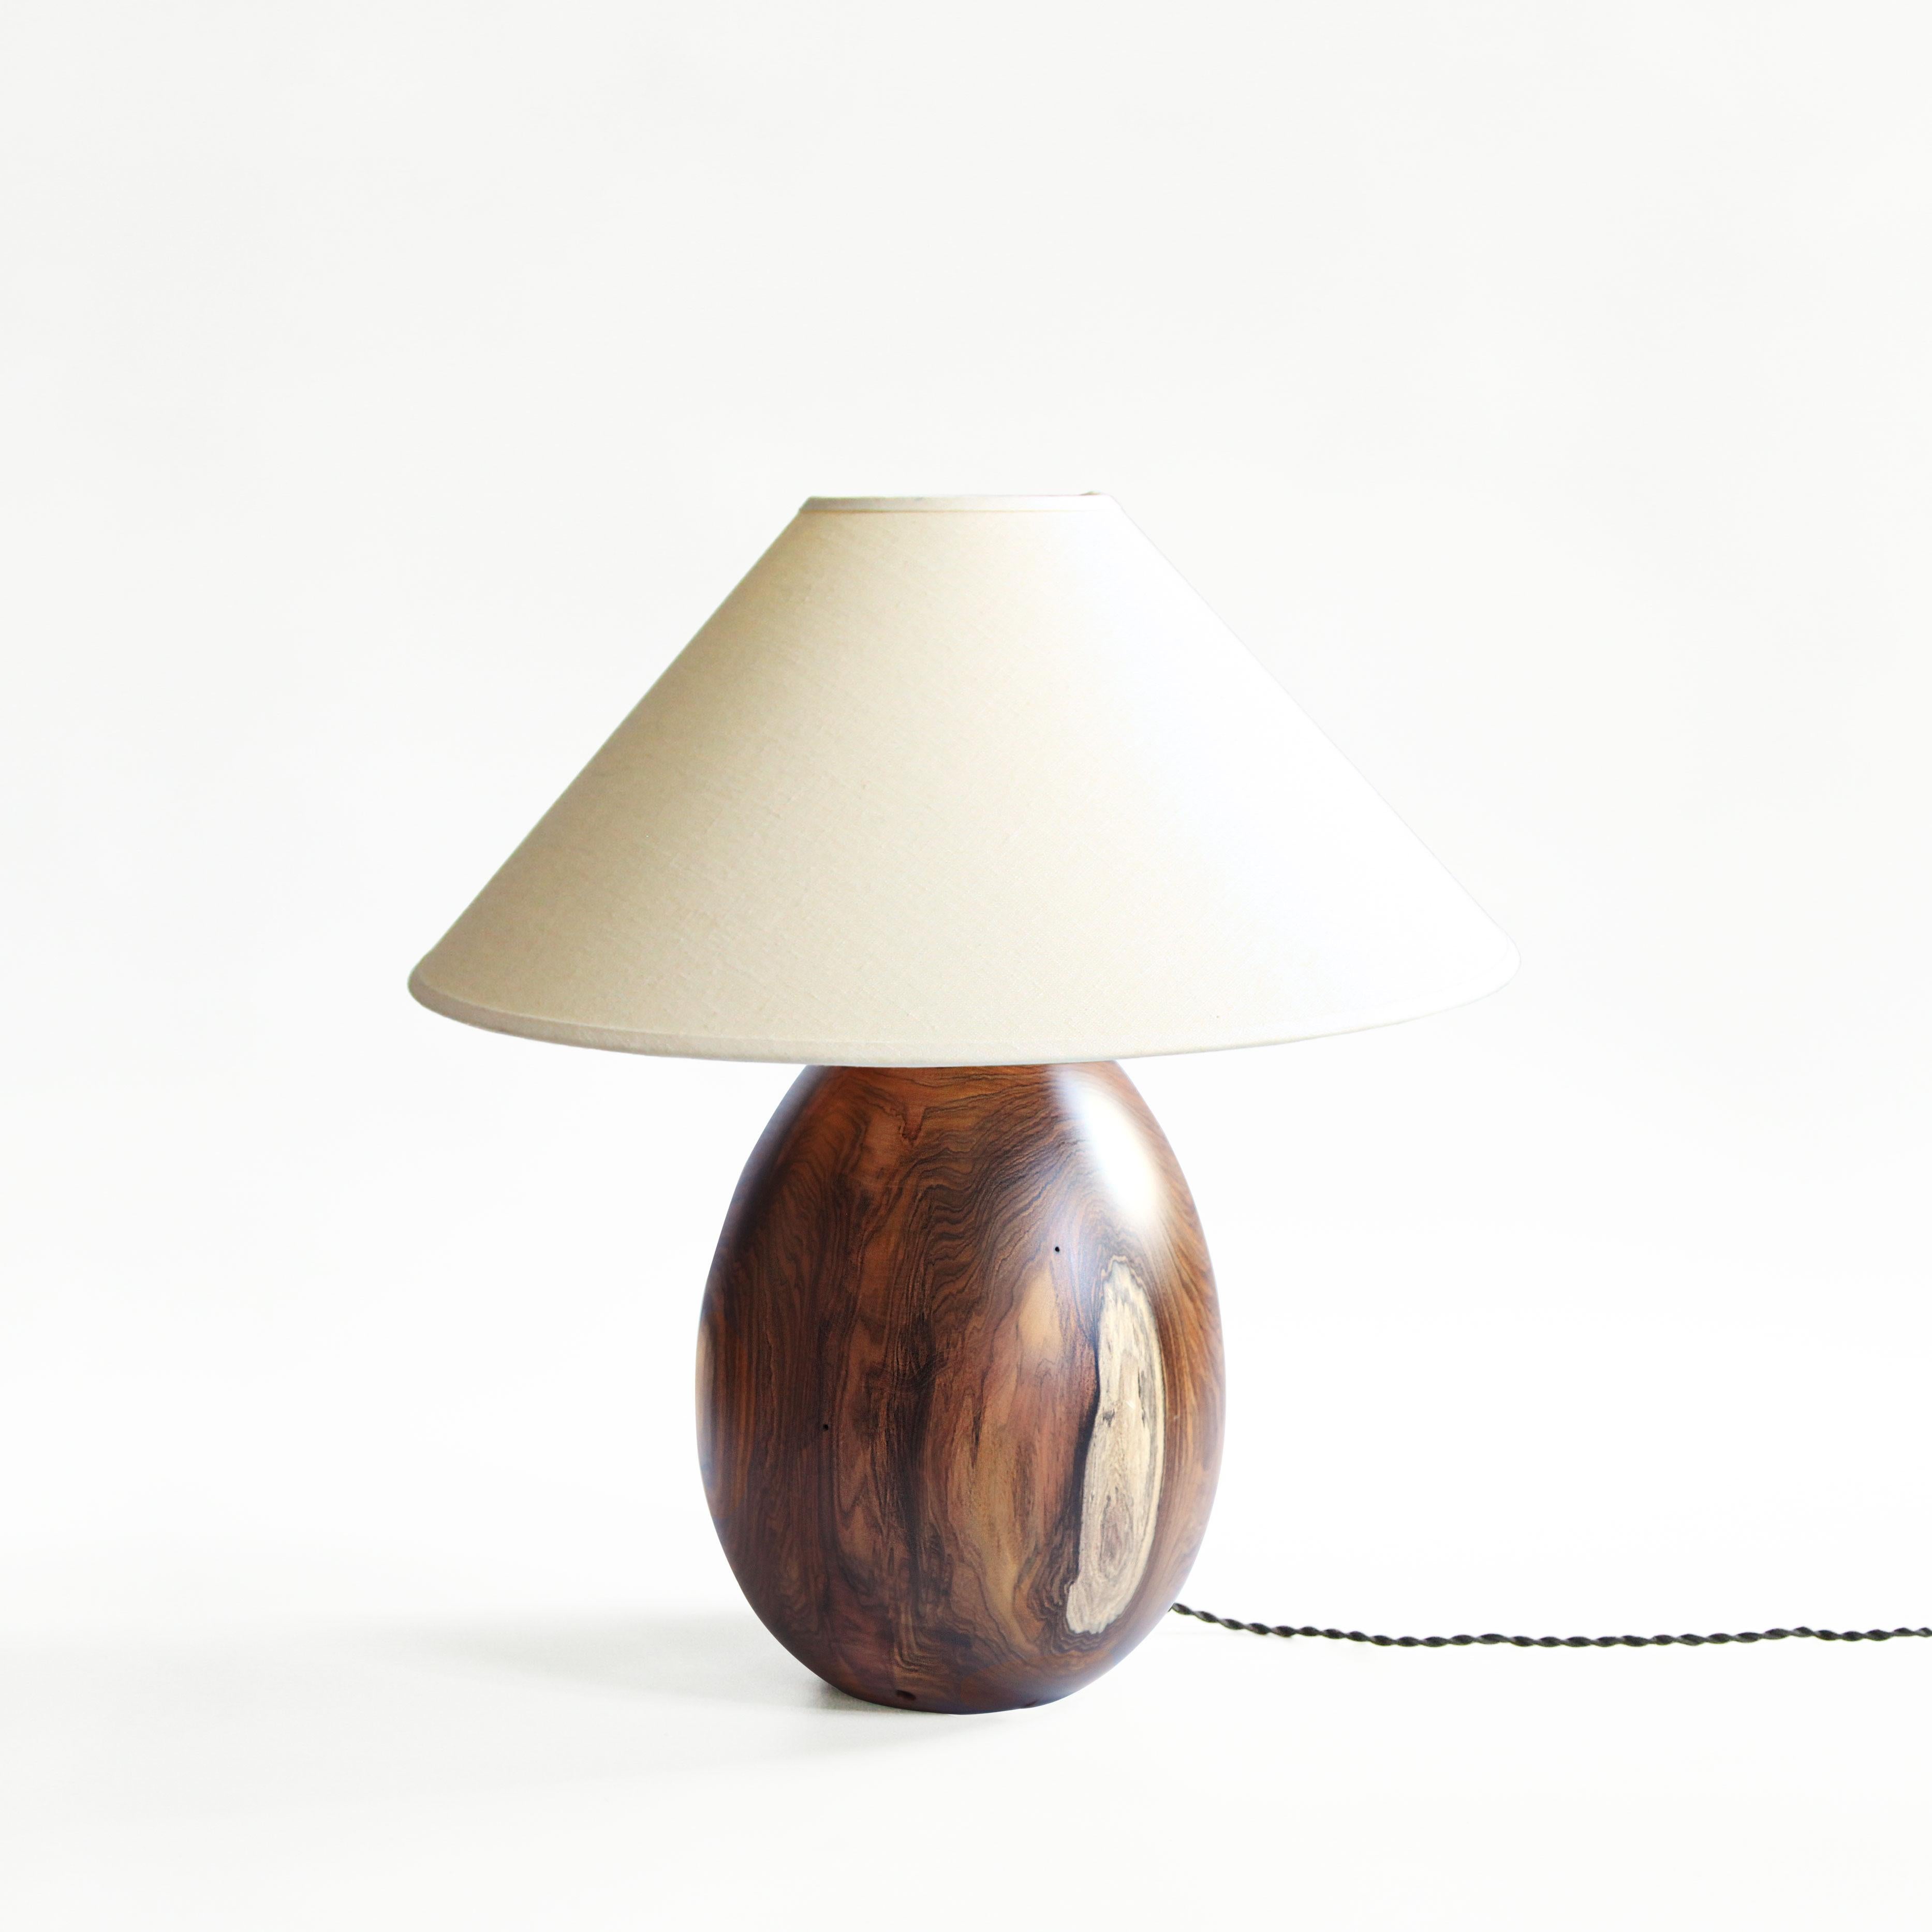 The Árbol collection is an embrace of tropical modernism; each lamp is composed of salvaged tropical hardwoods from the Bolivian city of Santa Cruz, where trees that are felled by natural causes, or for construction, are rescued by our team. A blend